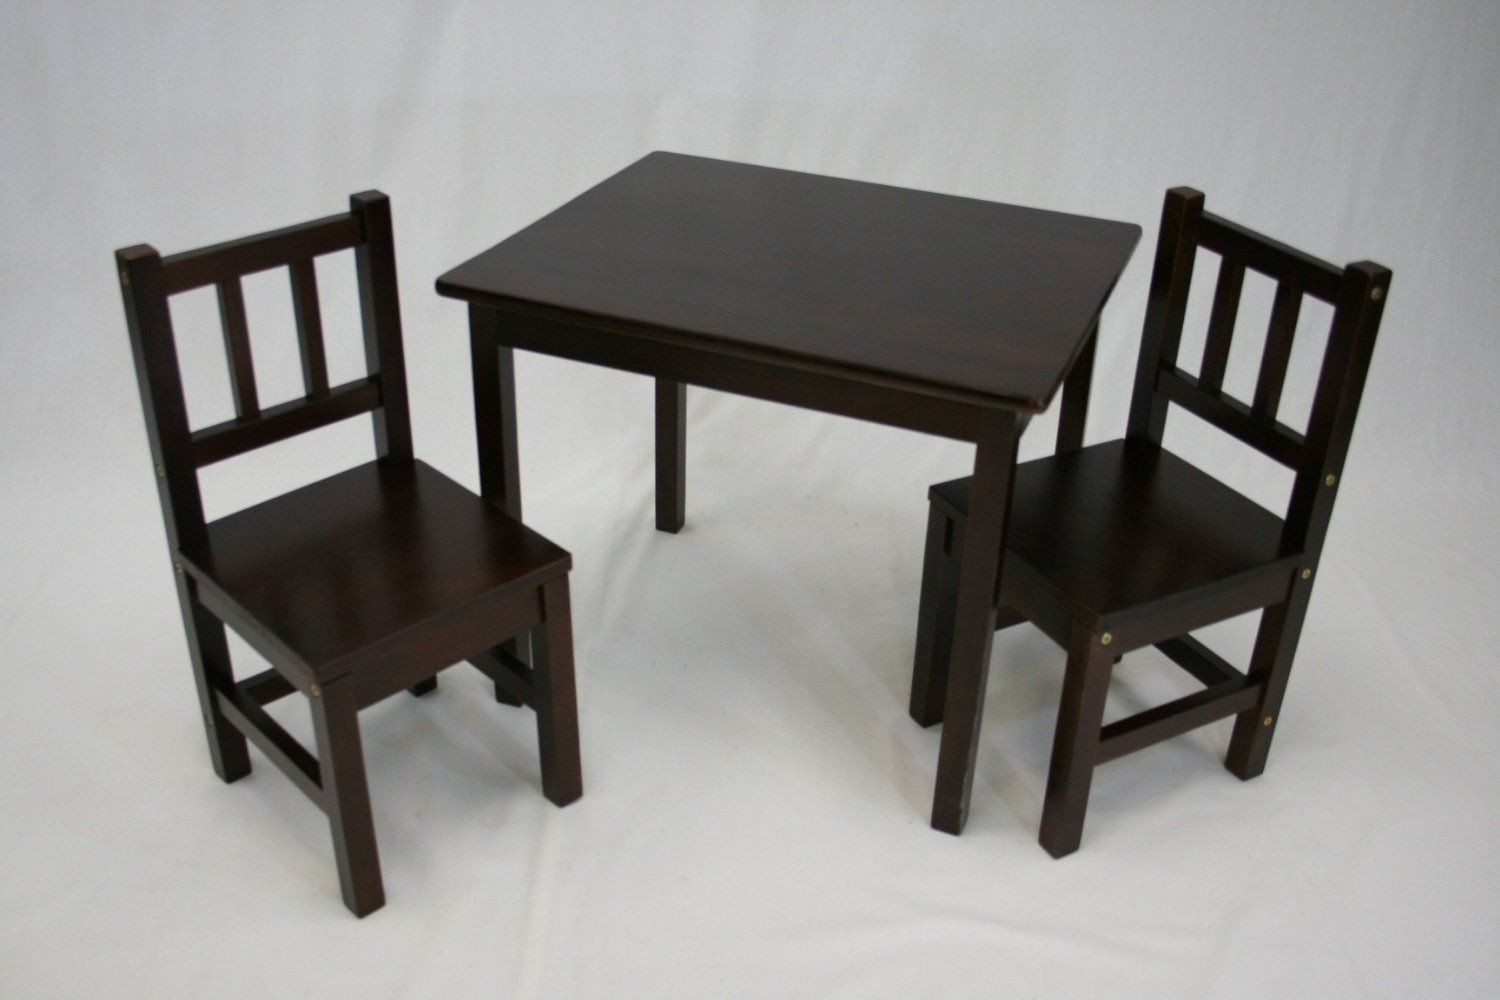 Amazon Kids Table And Chairs
 Amazon eHemco Kids Table and 2 Chairs Set Solid Hard